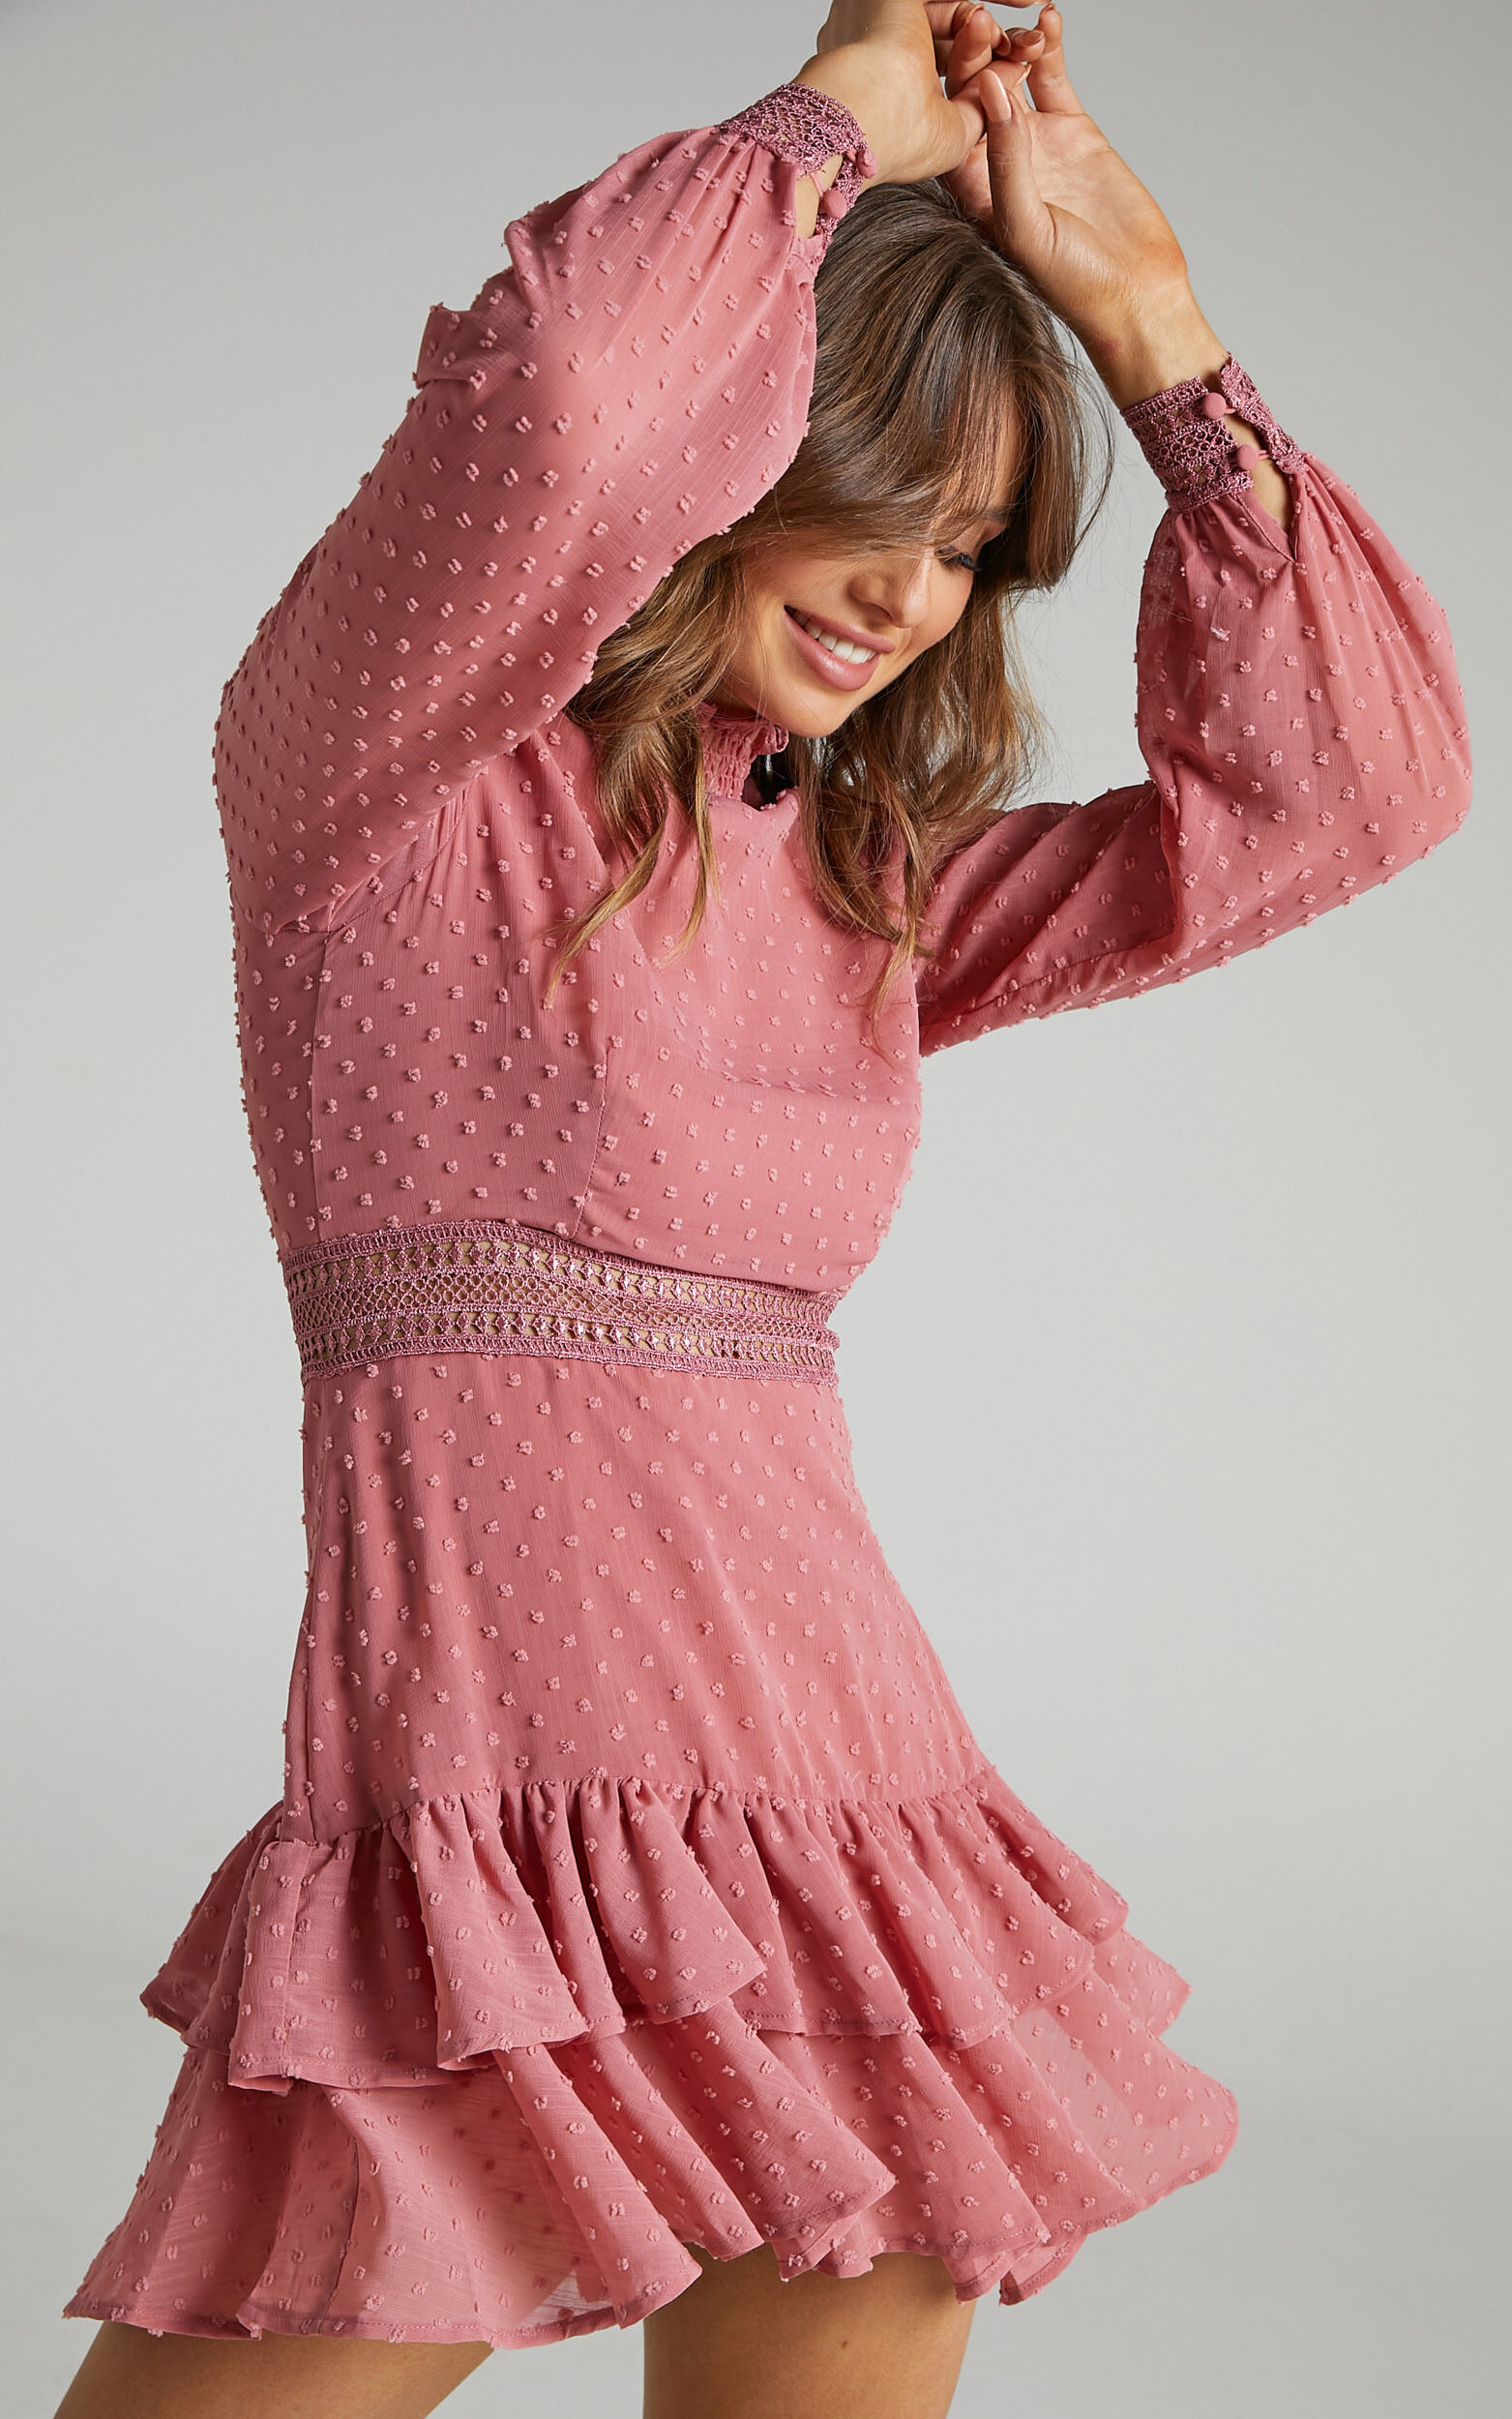 Are You Gonna Kiss Me Long Sleeve Mini Dress in Dusty Rose - 04, PNK7, super-hi-res image number null